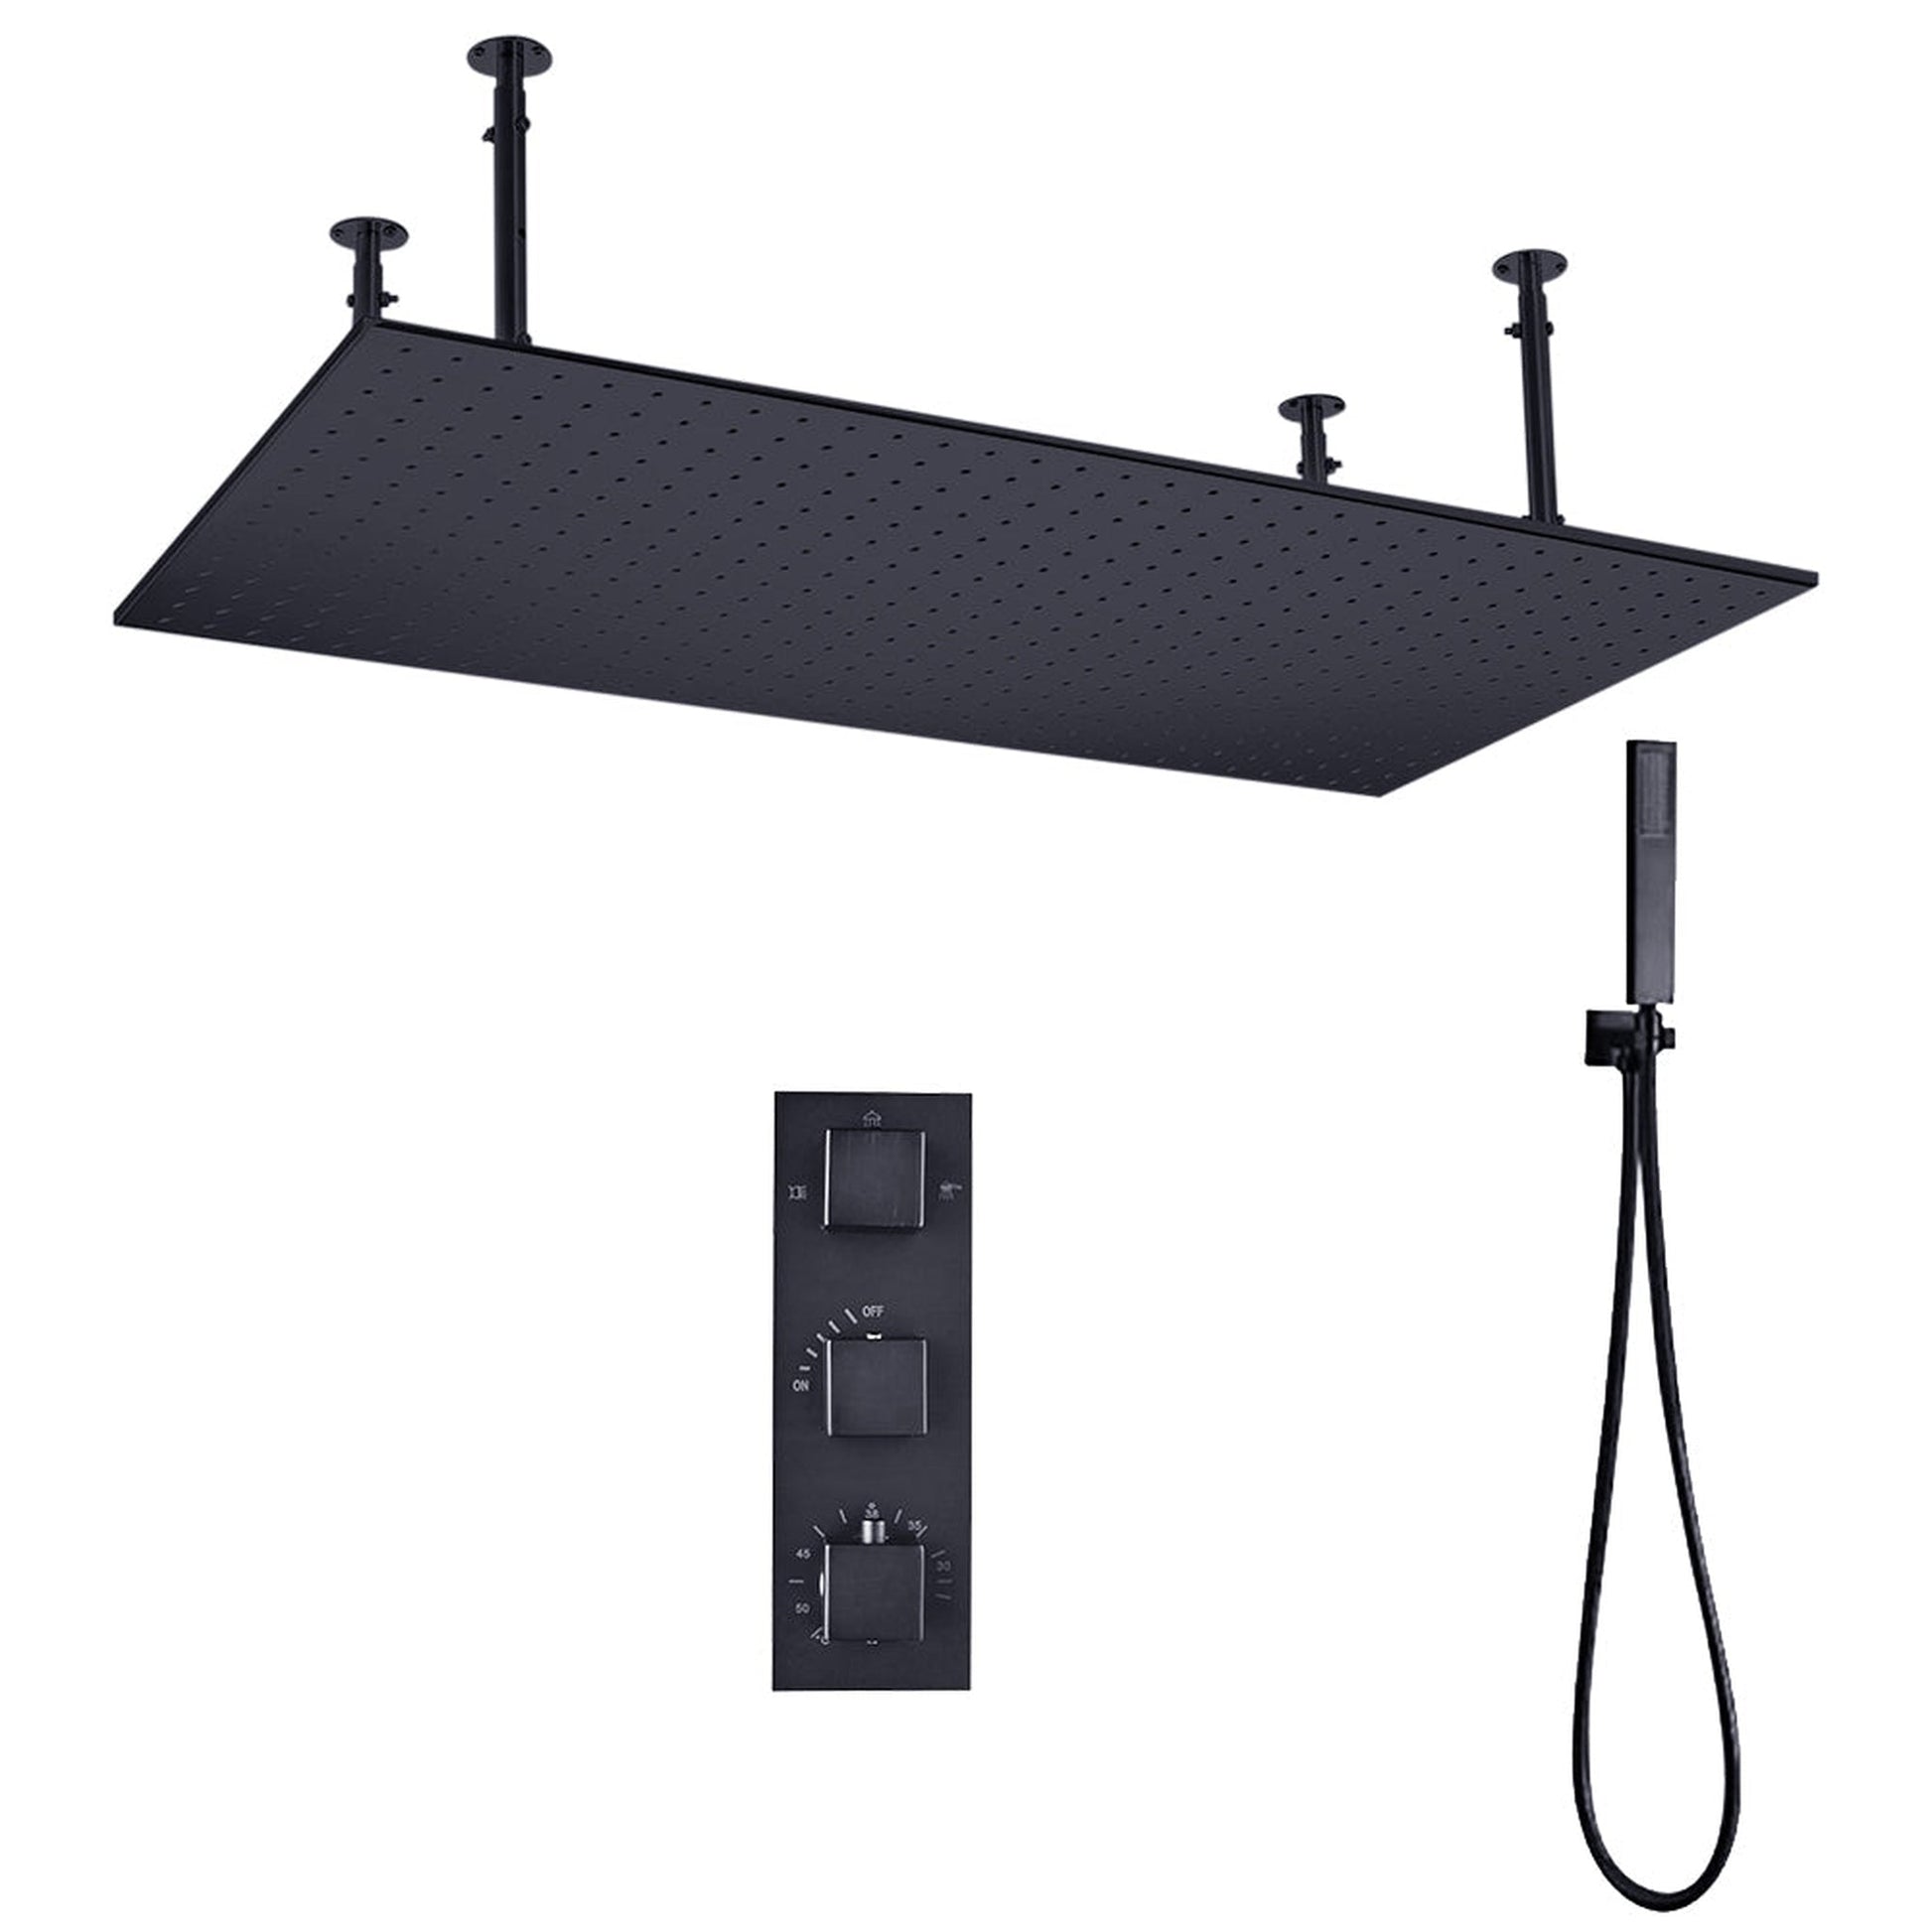 https://usbathstore.com/cdn/shop/products/Fontana-Martinique-Creative-Luxury-Large-Matte-Black-Rectangular-Ceiling-Mounted-LED-Solid-Brass-Shower-Head-Rain-Shower-System-With-Hand-Shower.jpg?v=1678268491&width=1946